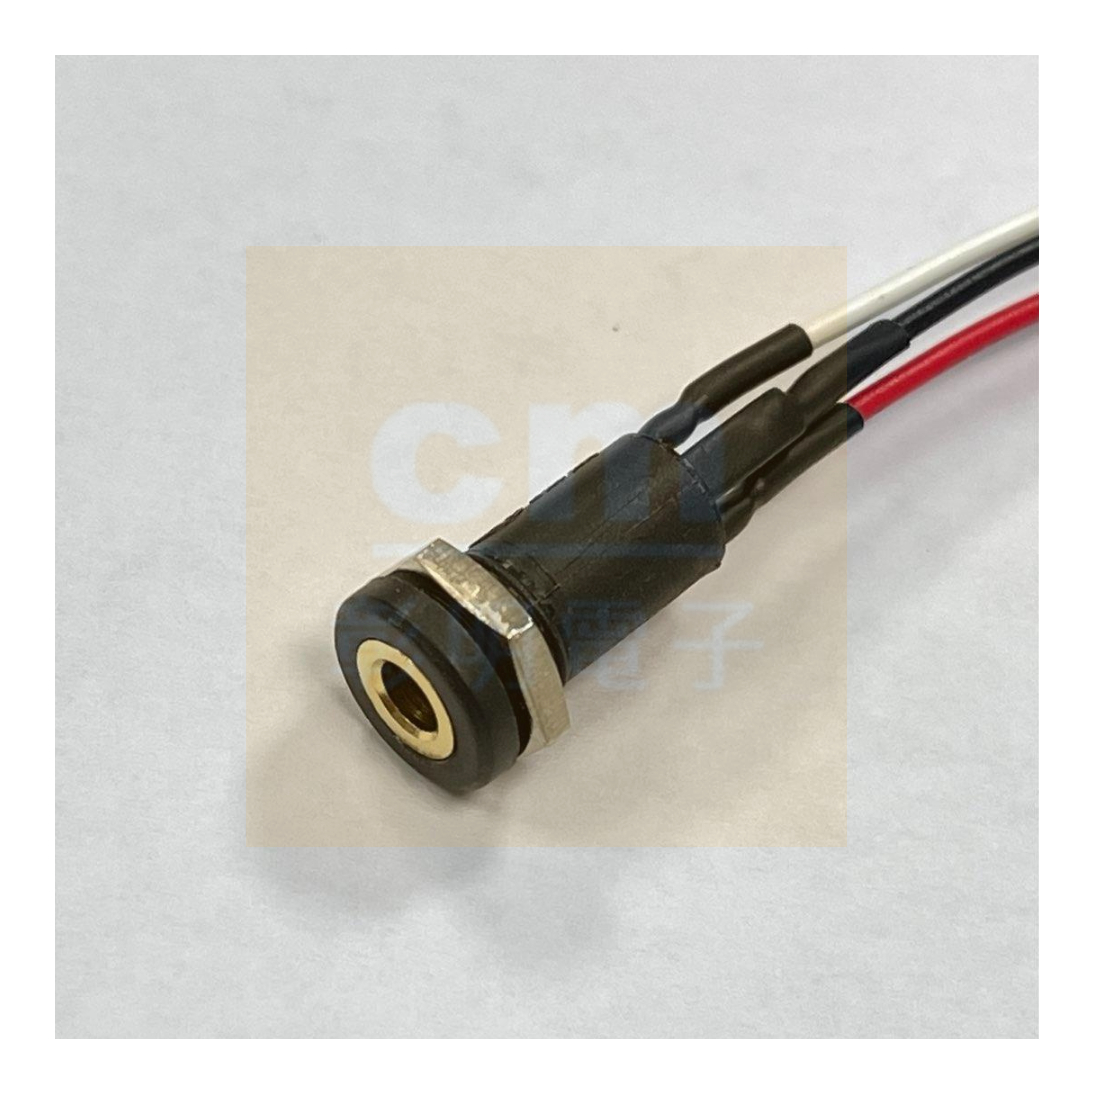 MJ-073H Audio Cable